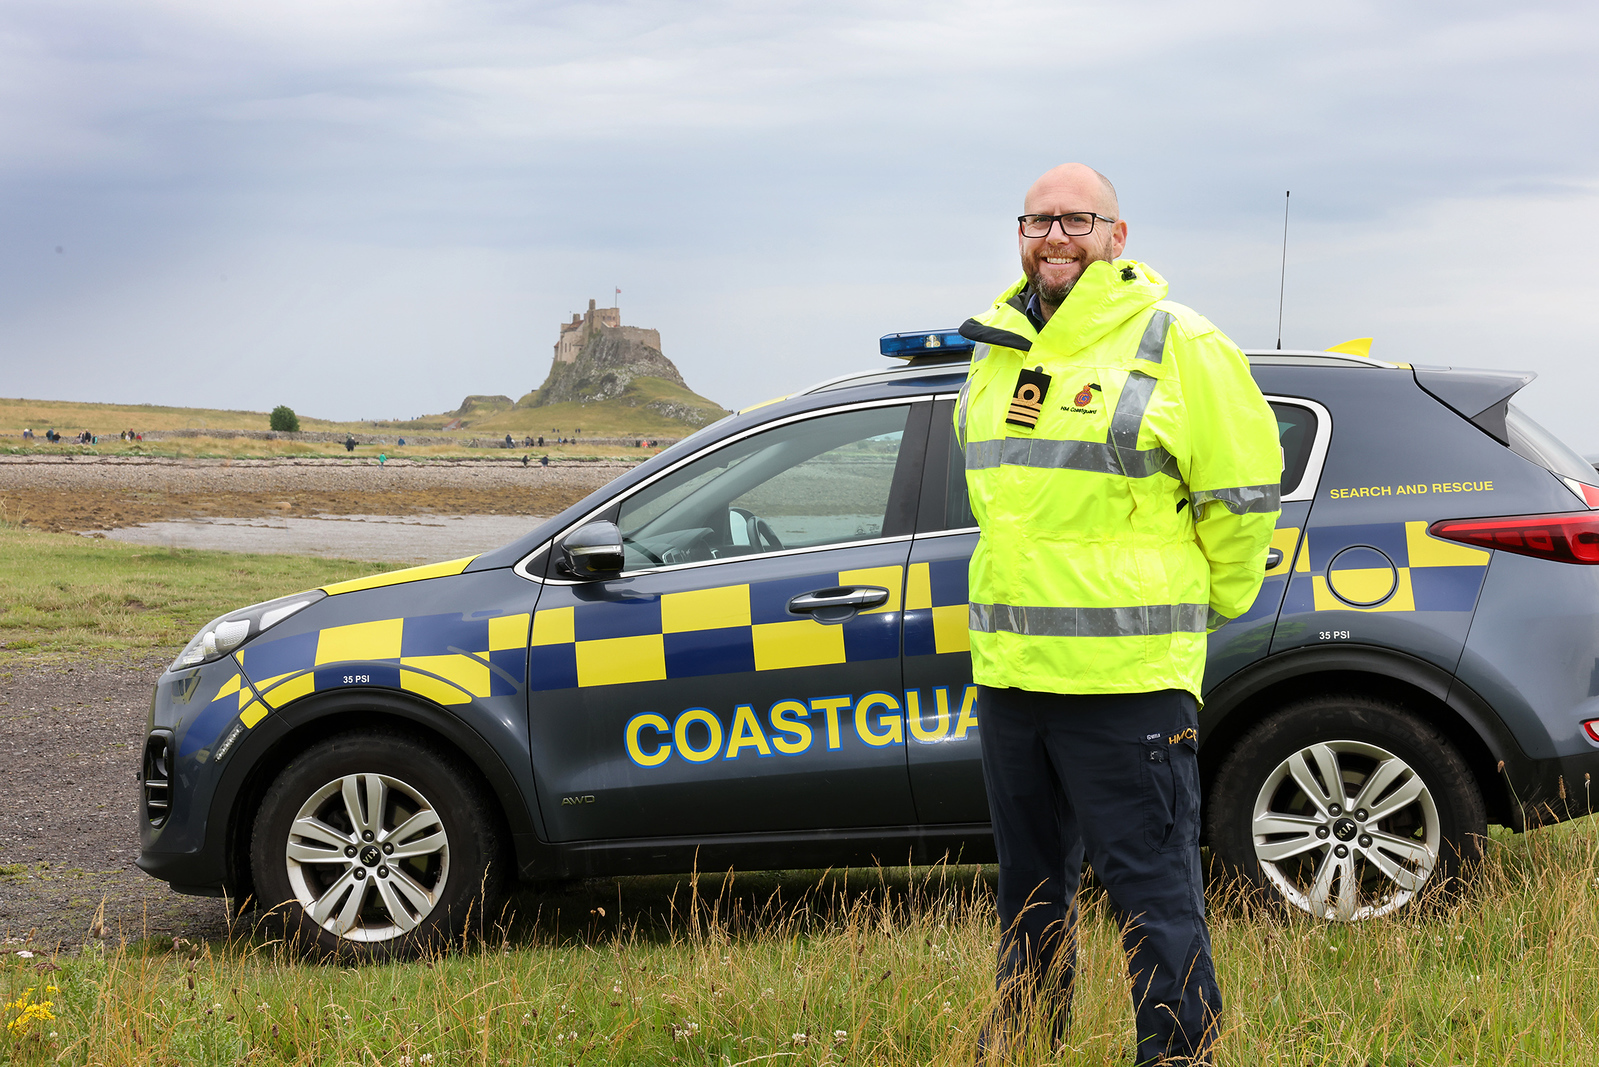 Smiling Coastguard in high-vis jacket in front of Coastguard liveried vehicle and Holy Island in background